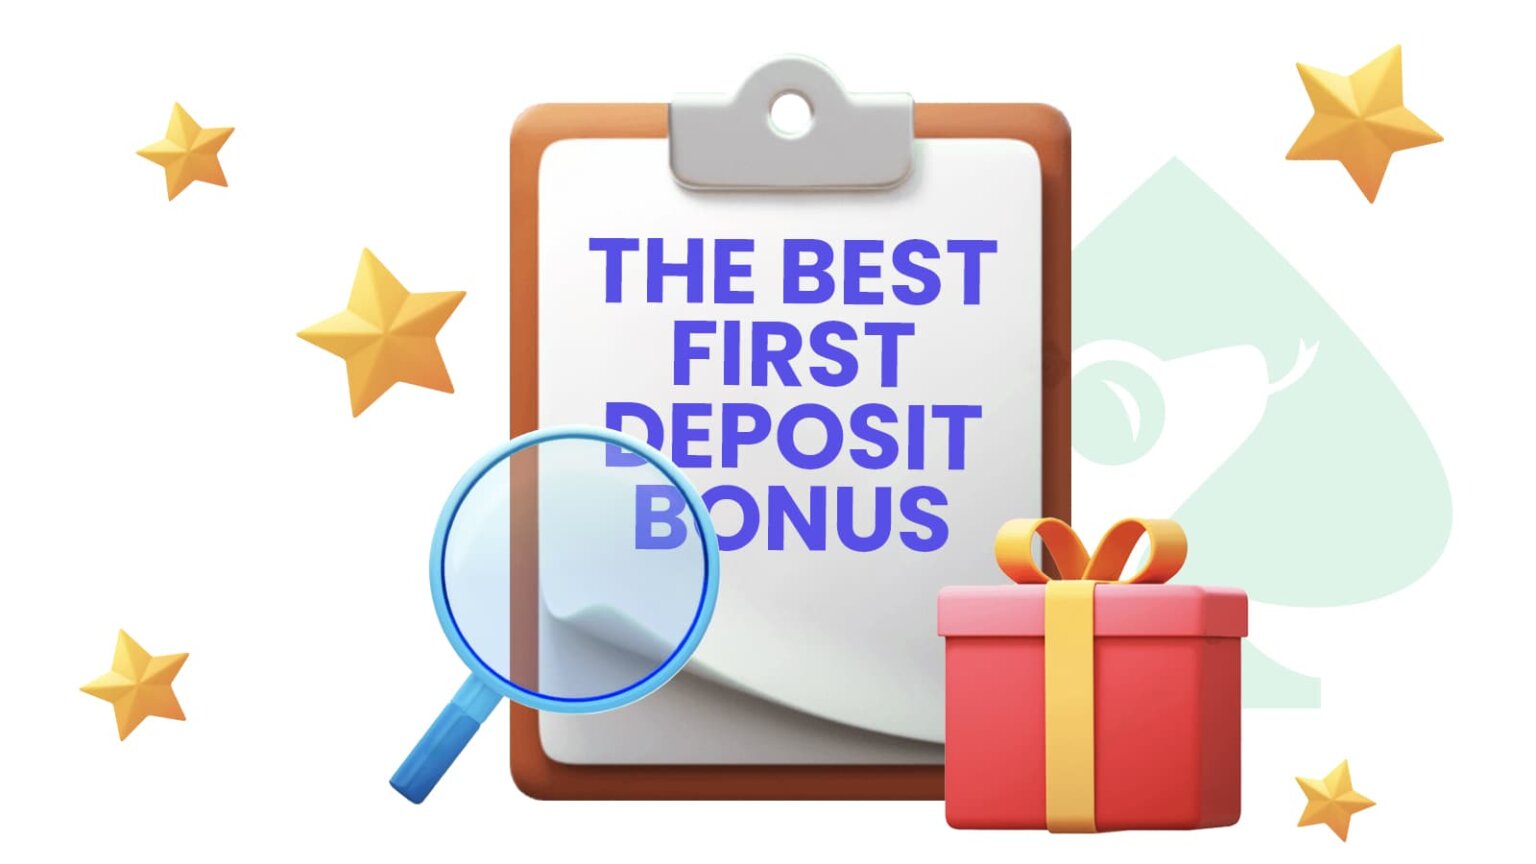 The Best First Deposit Casino Bonuses by Type